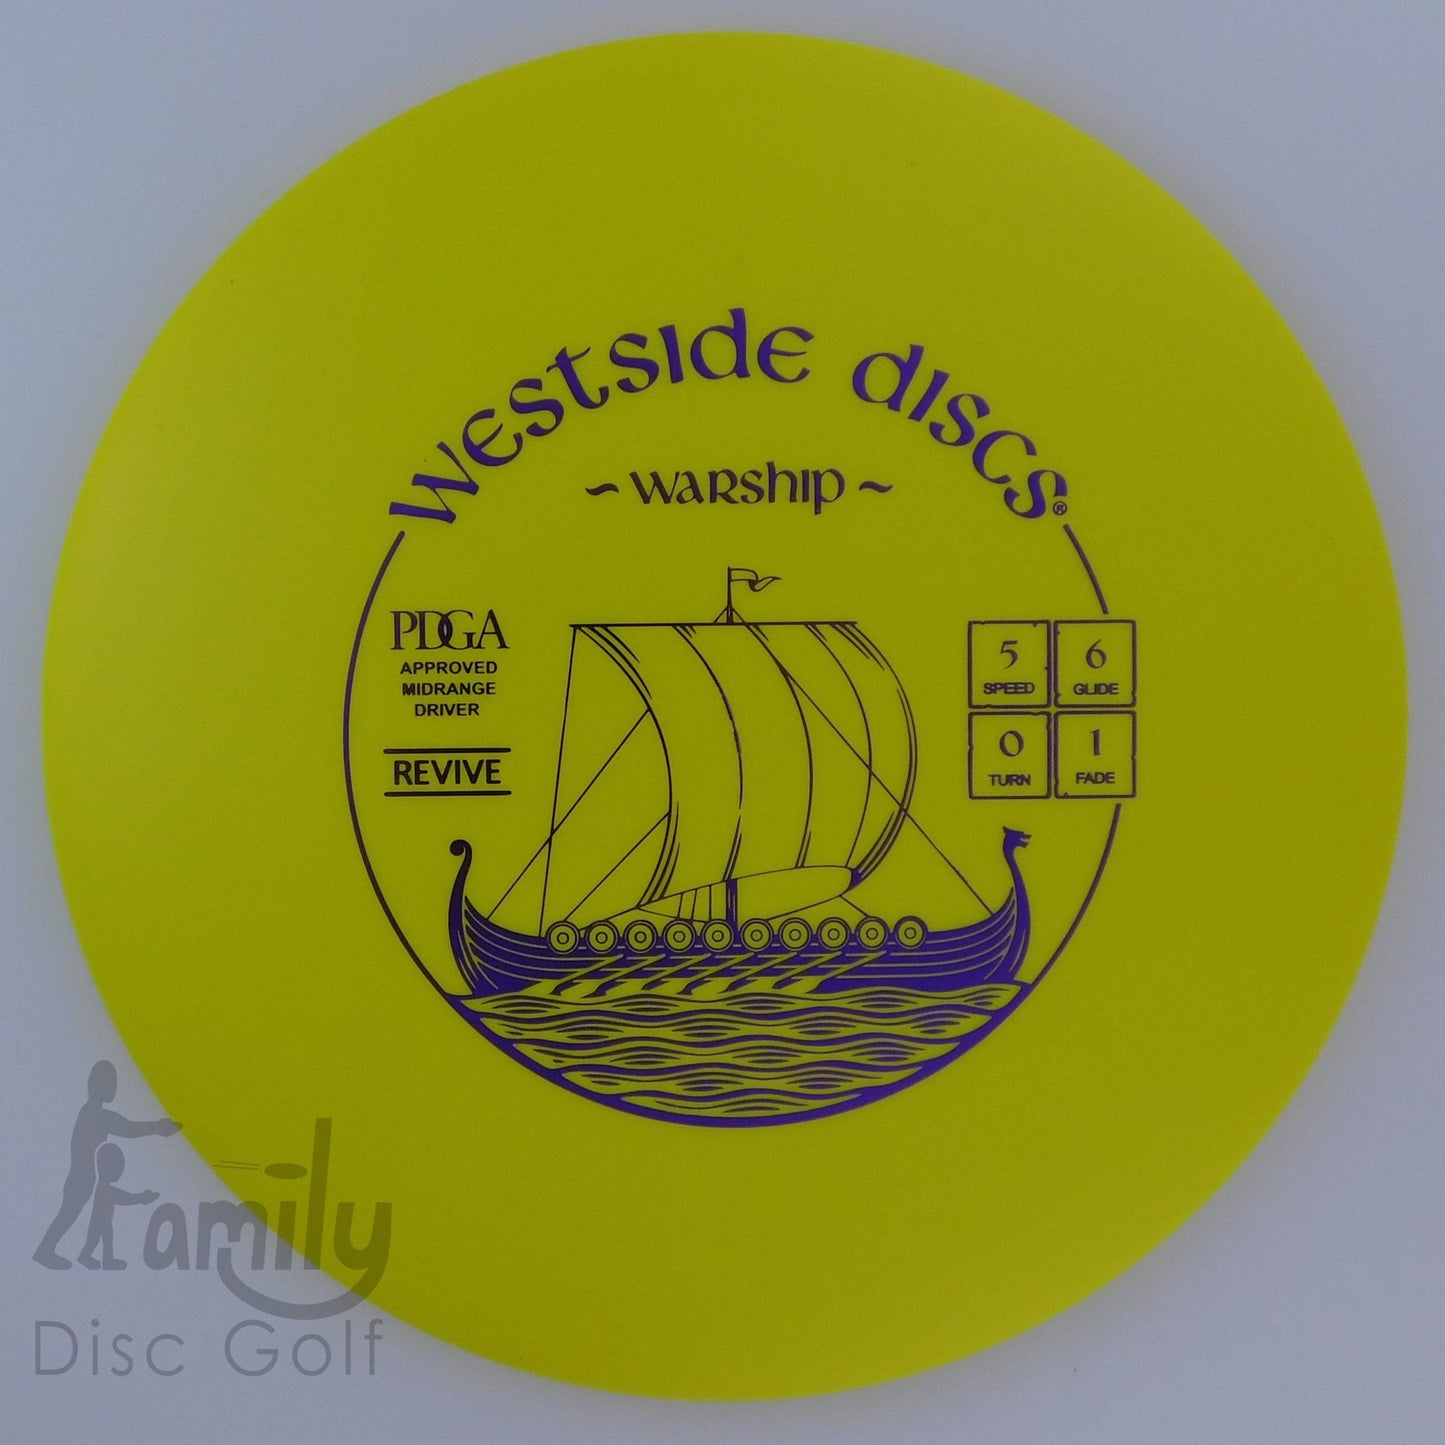 Westside Discs Warship - Revive 5│6│0│1 179.7g - Yellow - Westside Discs Warship - Revive - 101385